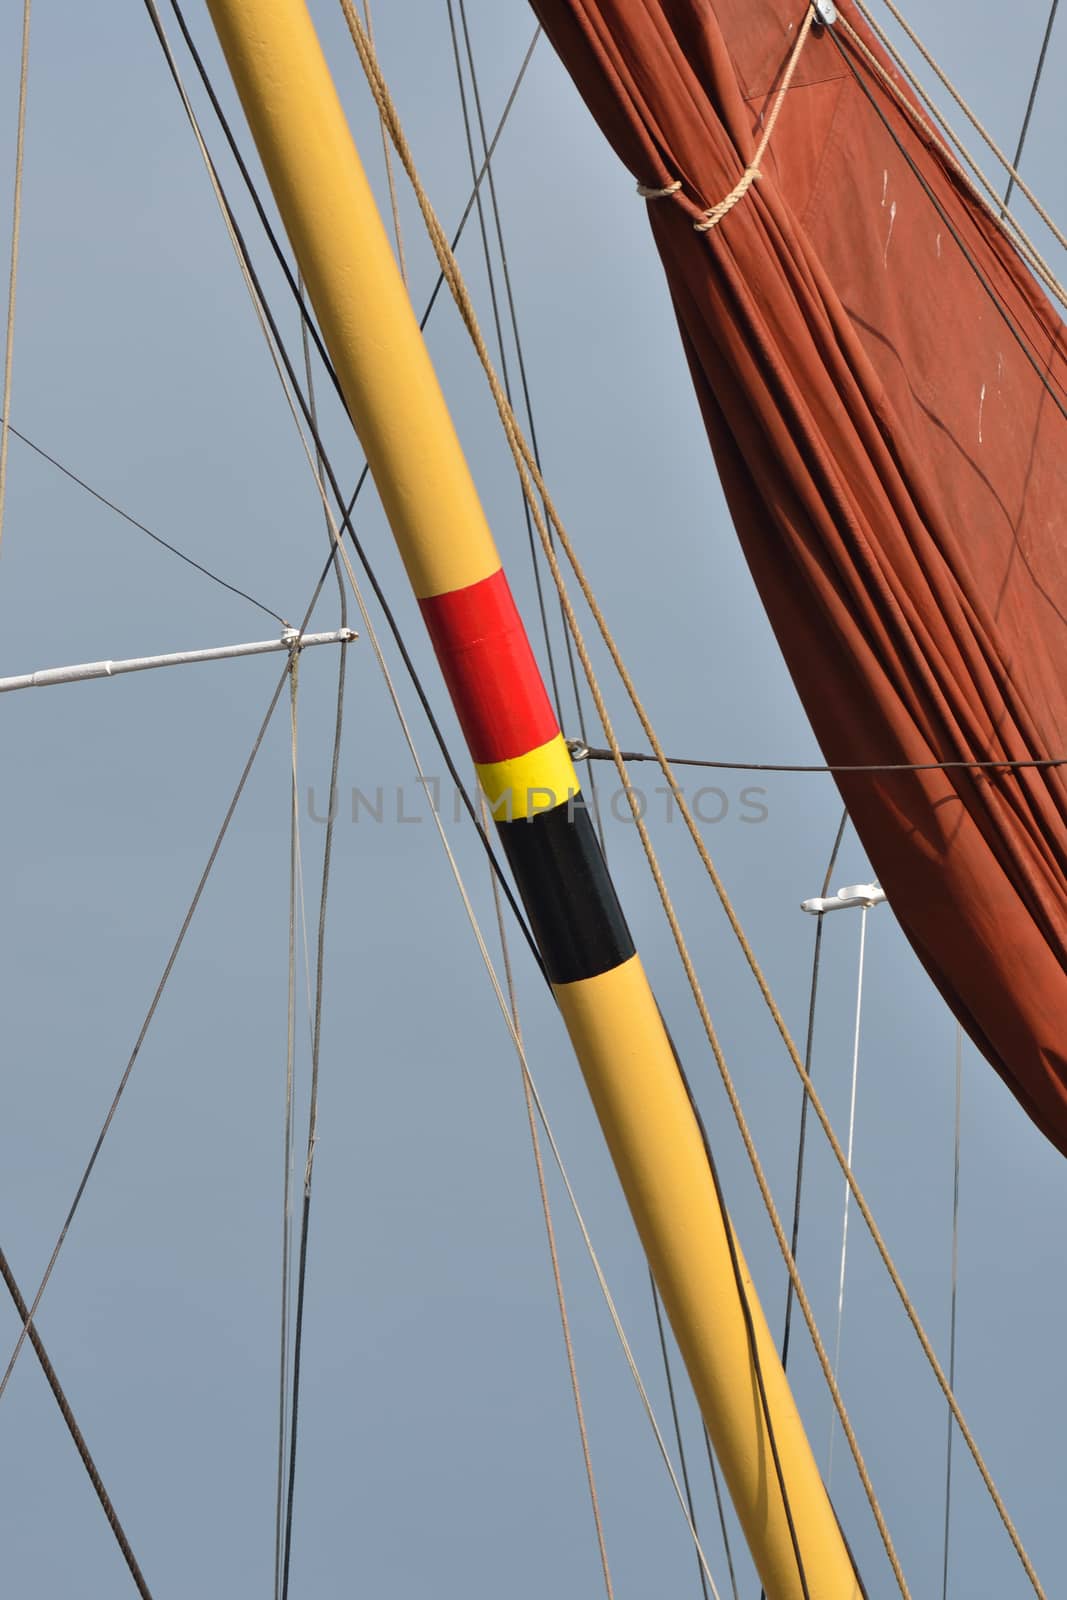 Rigging with sail and mast